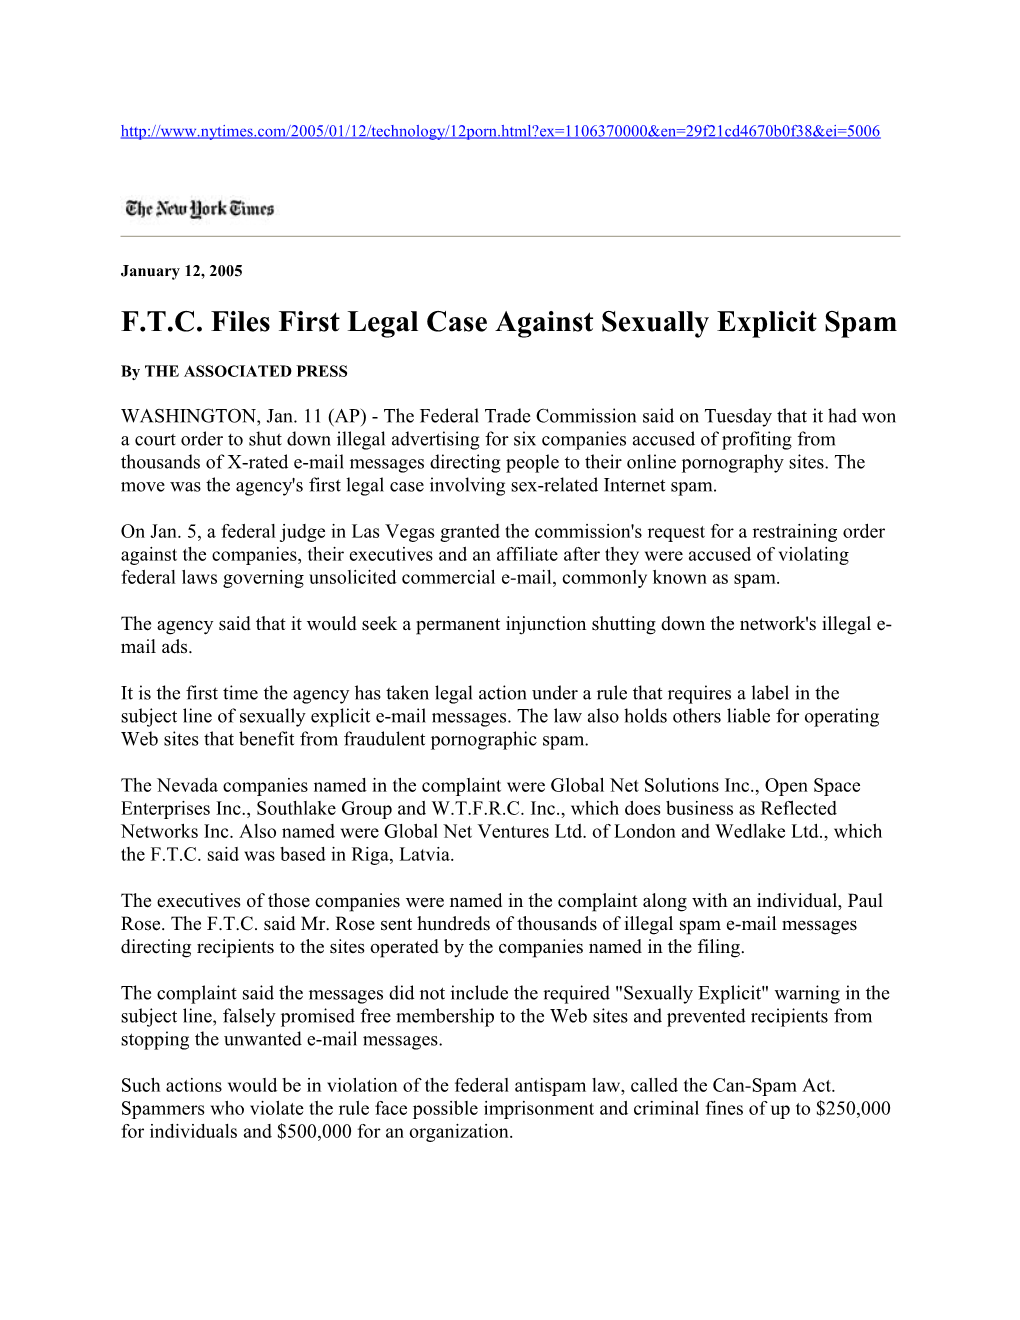 F.T.C. Files First Legal Case Against Sexually Explicit Spam